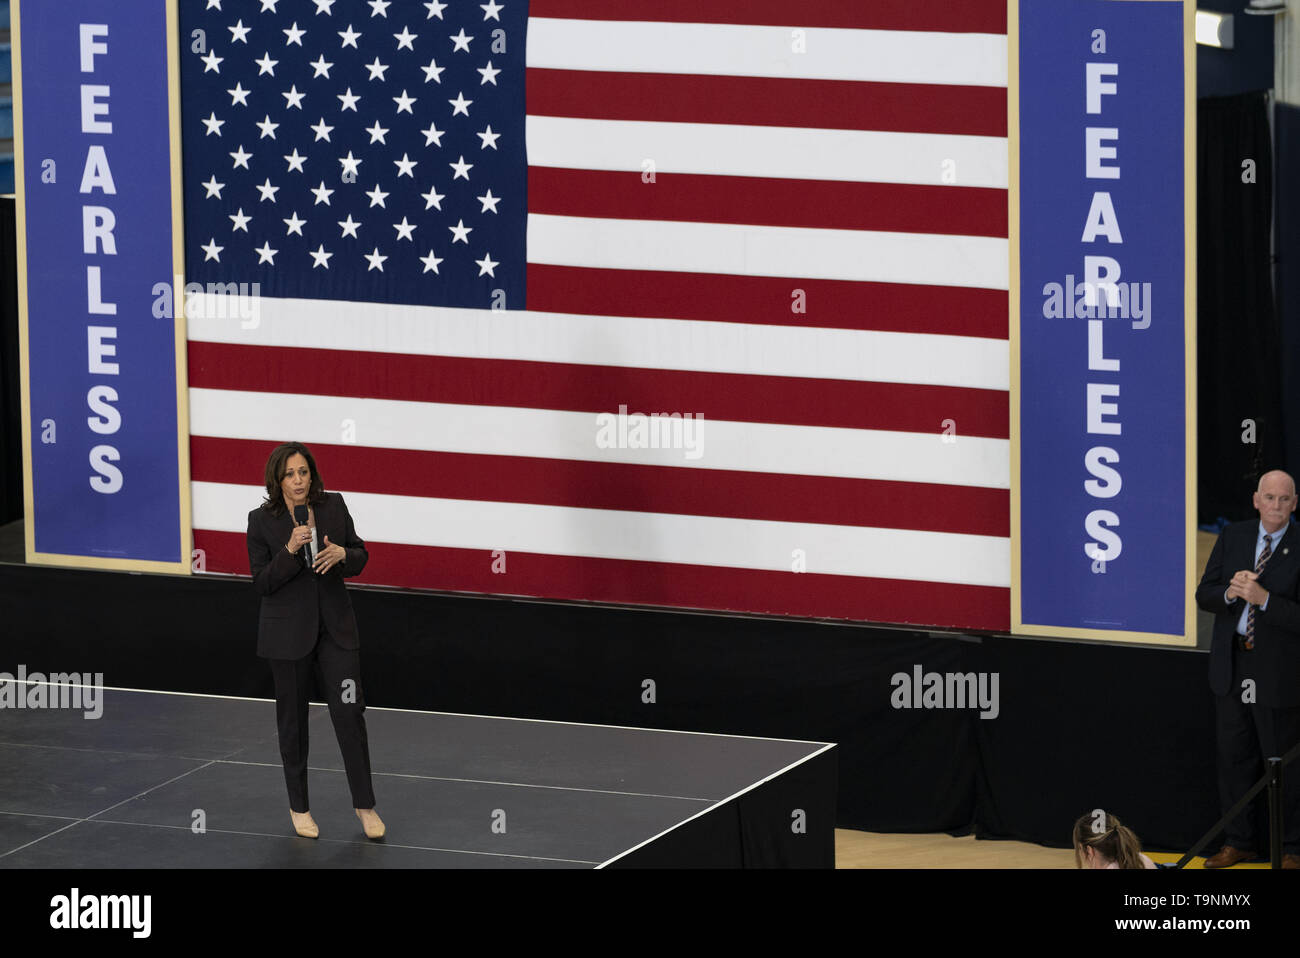 Los Angeles, CA, USA. 19th May, 2019. Democratic presidential candidate U.S. Senator Kamala Harris (D-CA) seen speaking at a campaign rally in Los Angeles. This was Harris's first campaign rally in Los Angeles since she announced her candidacy for the President of the United States. The candidate spoke about the need to combat gun violence, raise teacher pay and provide middle class tax relief. Credit: Ronen Tivony/SOPA Images/ZUMA Wire/Alamy Live News Stock Photo